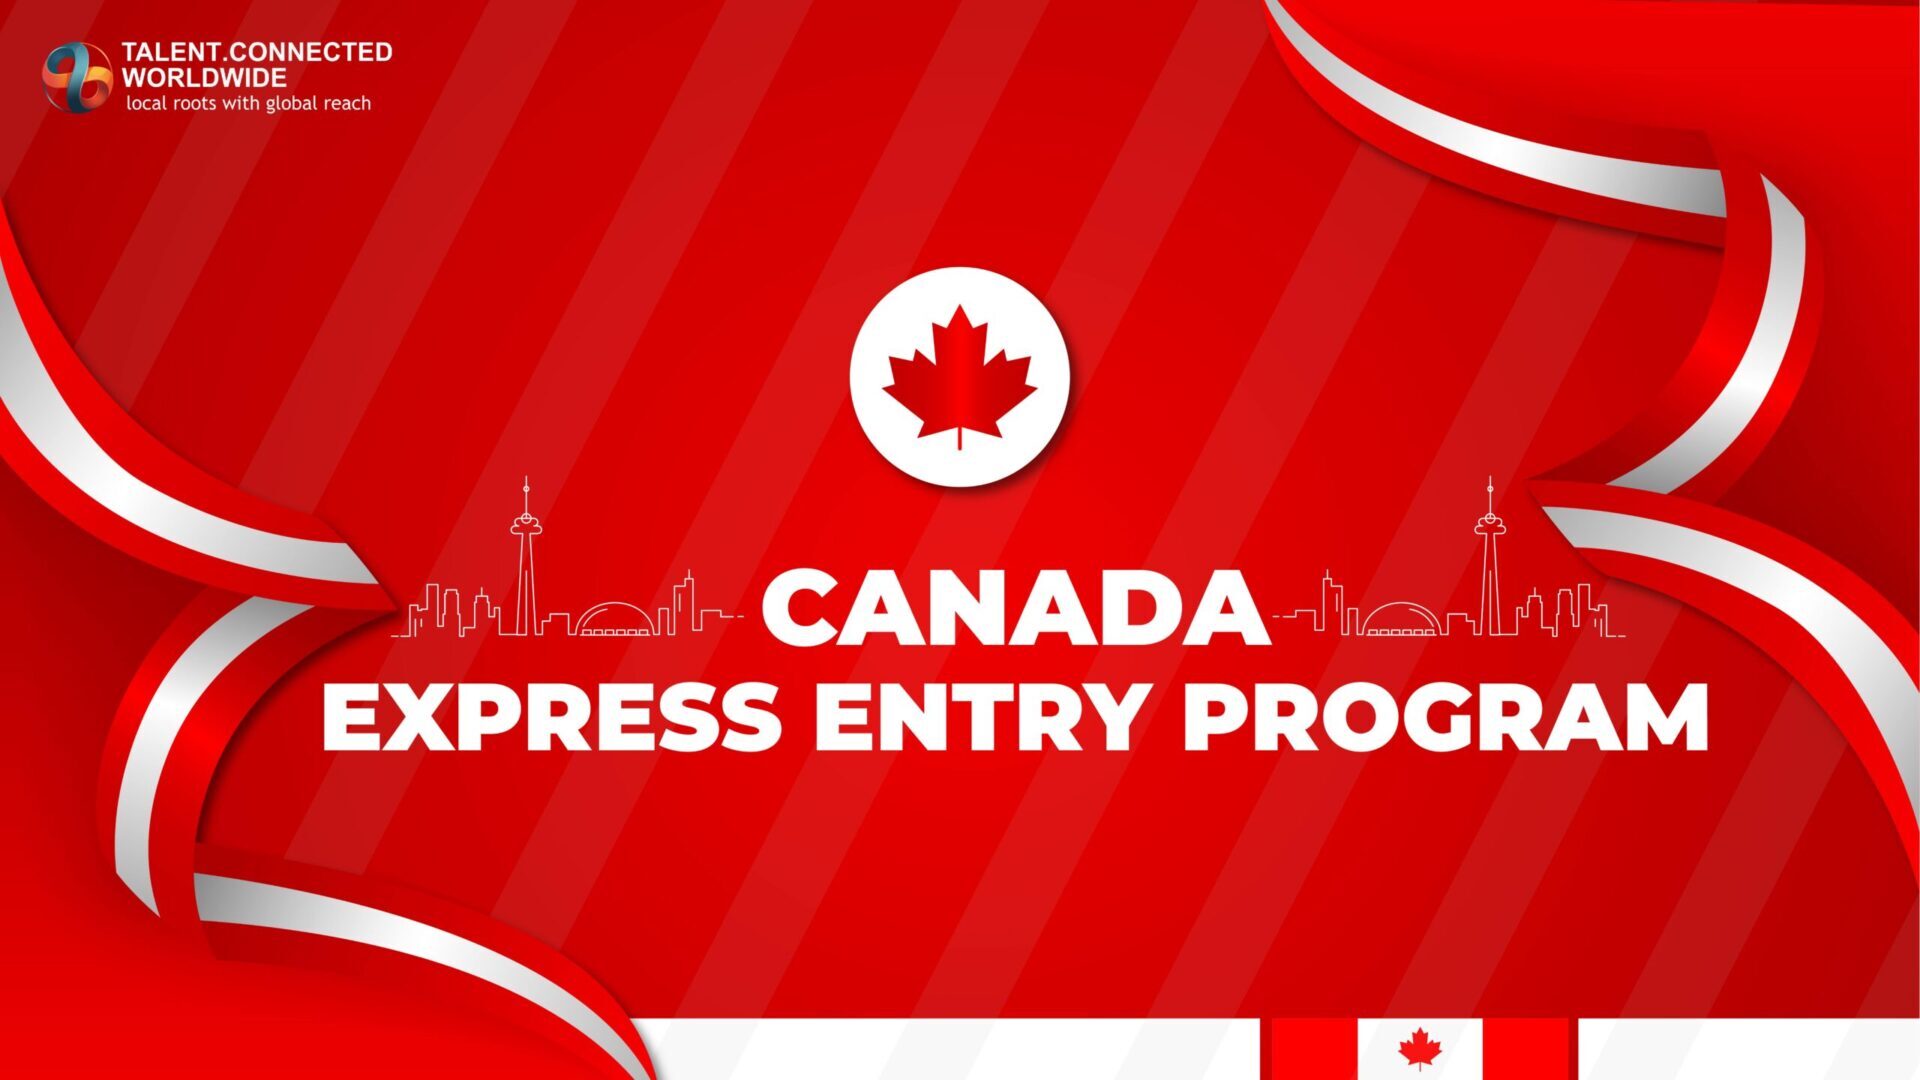 Canada Express Entry Program The Entire Process